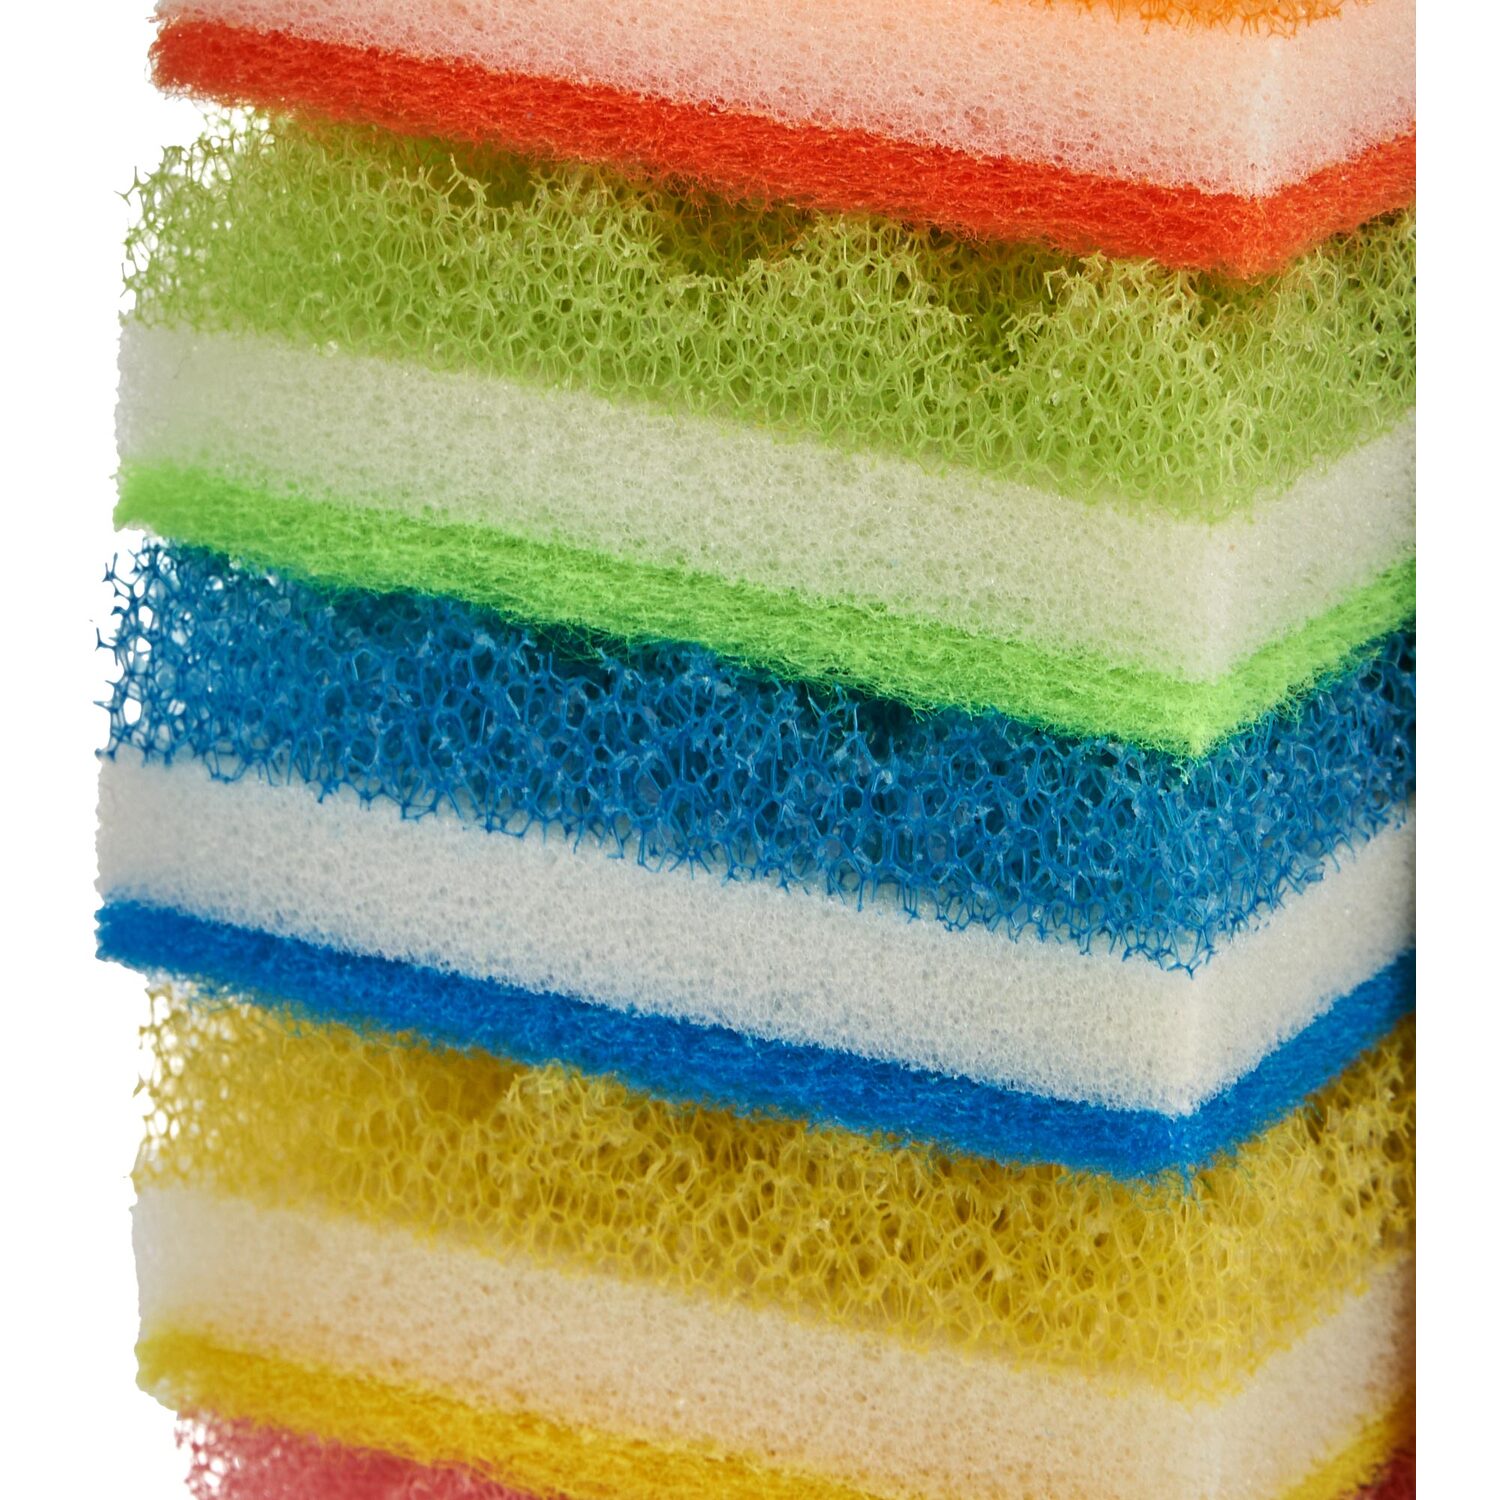 My Home 3 Layer Sponges 5 Pack Image 5